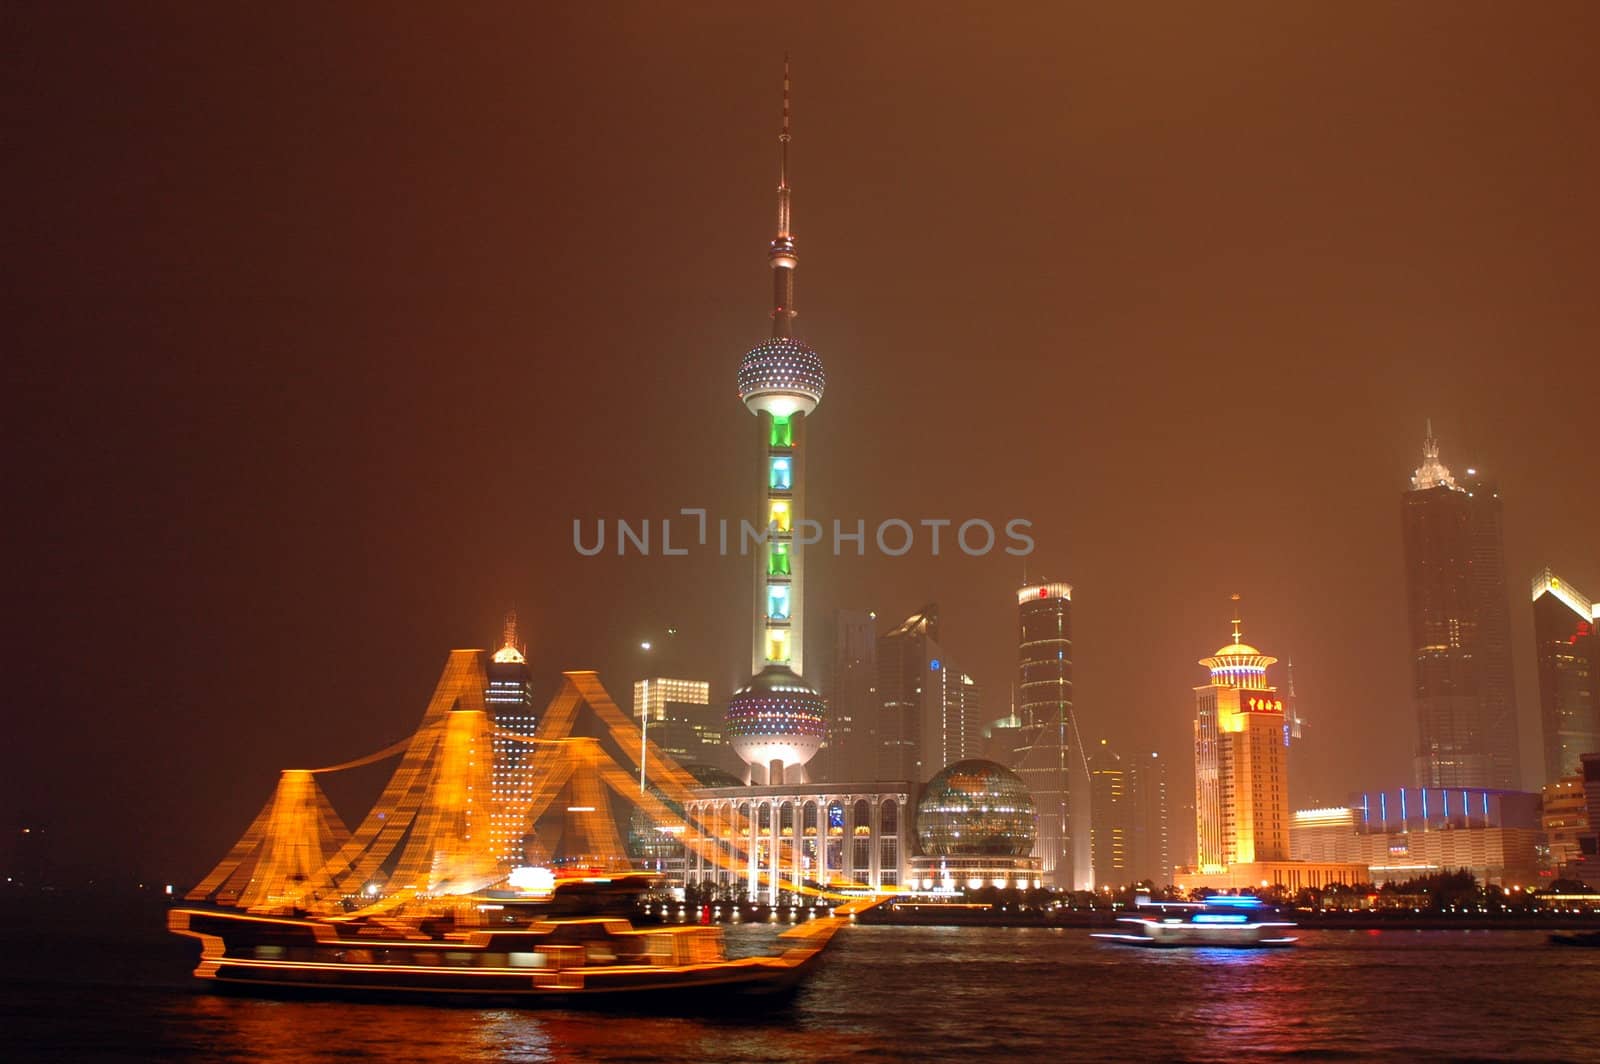 Shanghai city in China. Famous Orient Pearl TV tower with Huangpu River and ship by night.